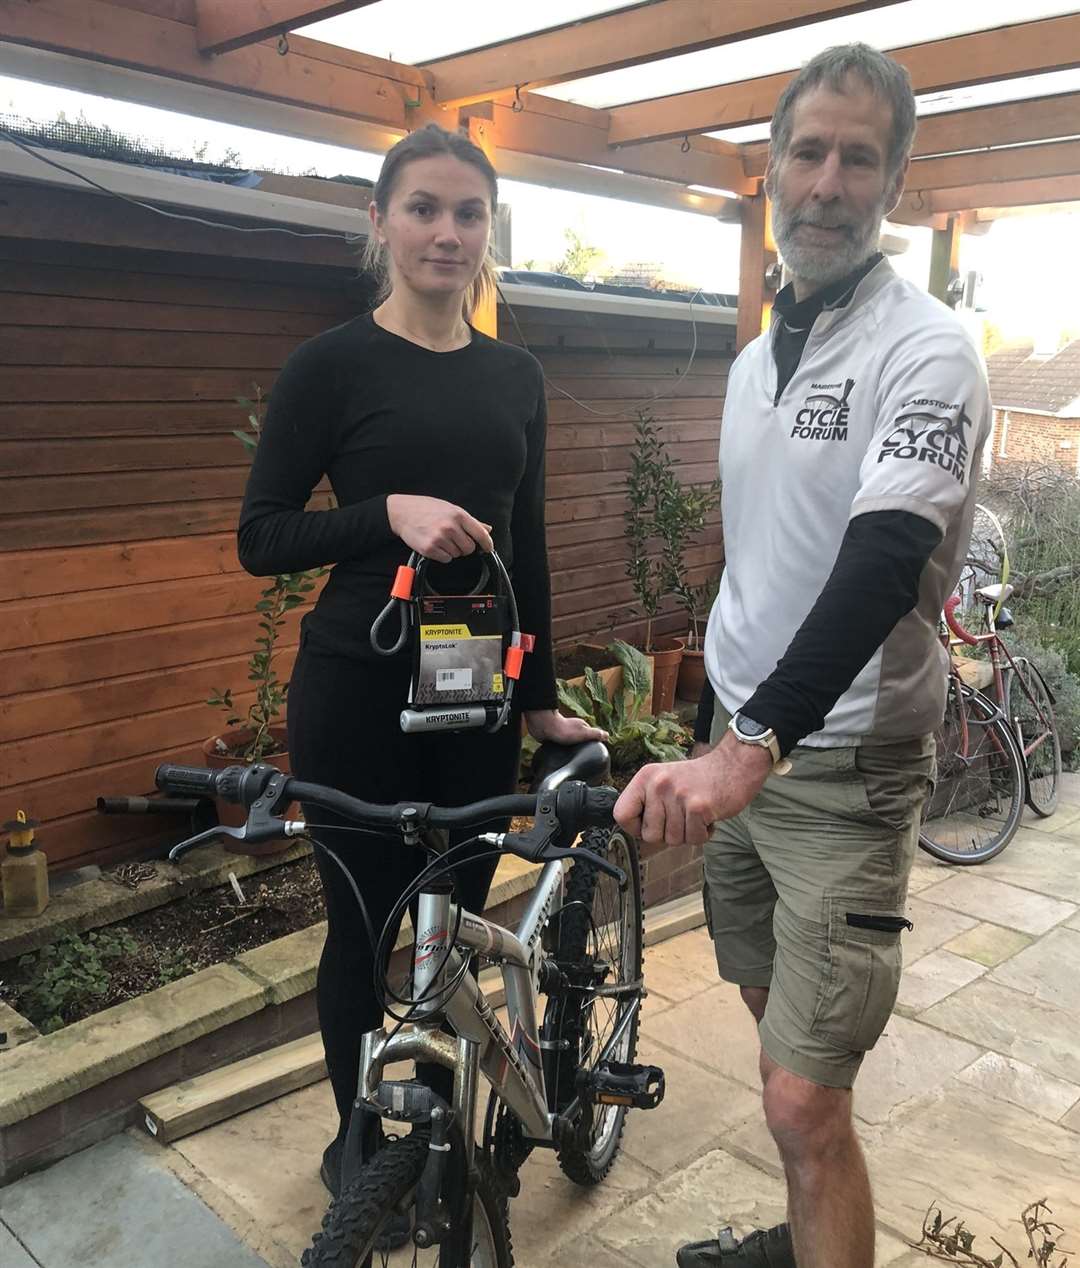 Inna Pashkevych and Duncan Edwards with her new bike and chain